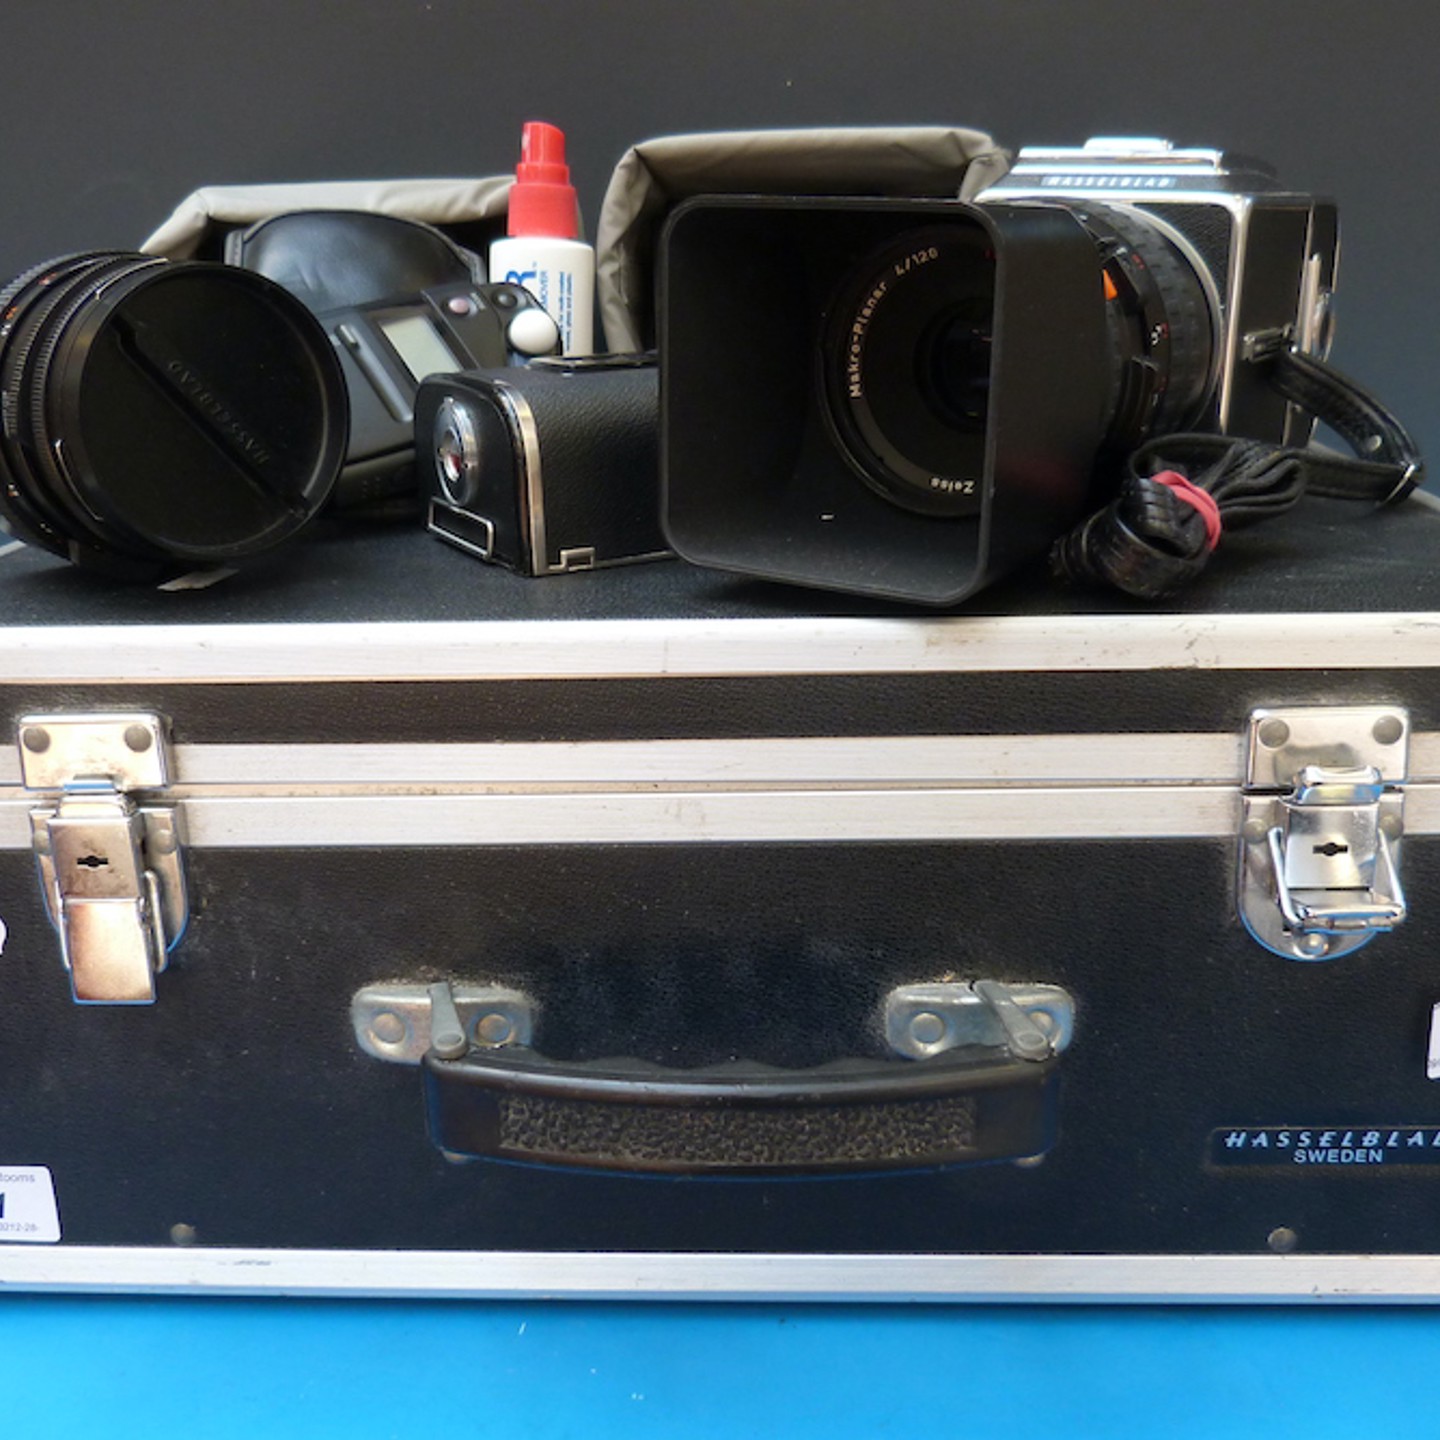 A Hasselblad 500 Cm Single Lens Reflex Camera. Sold For £1,200